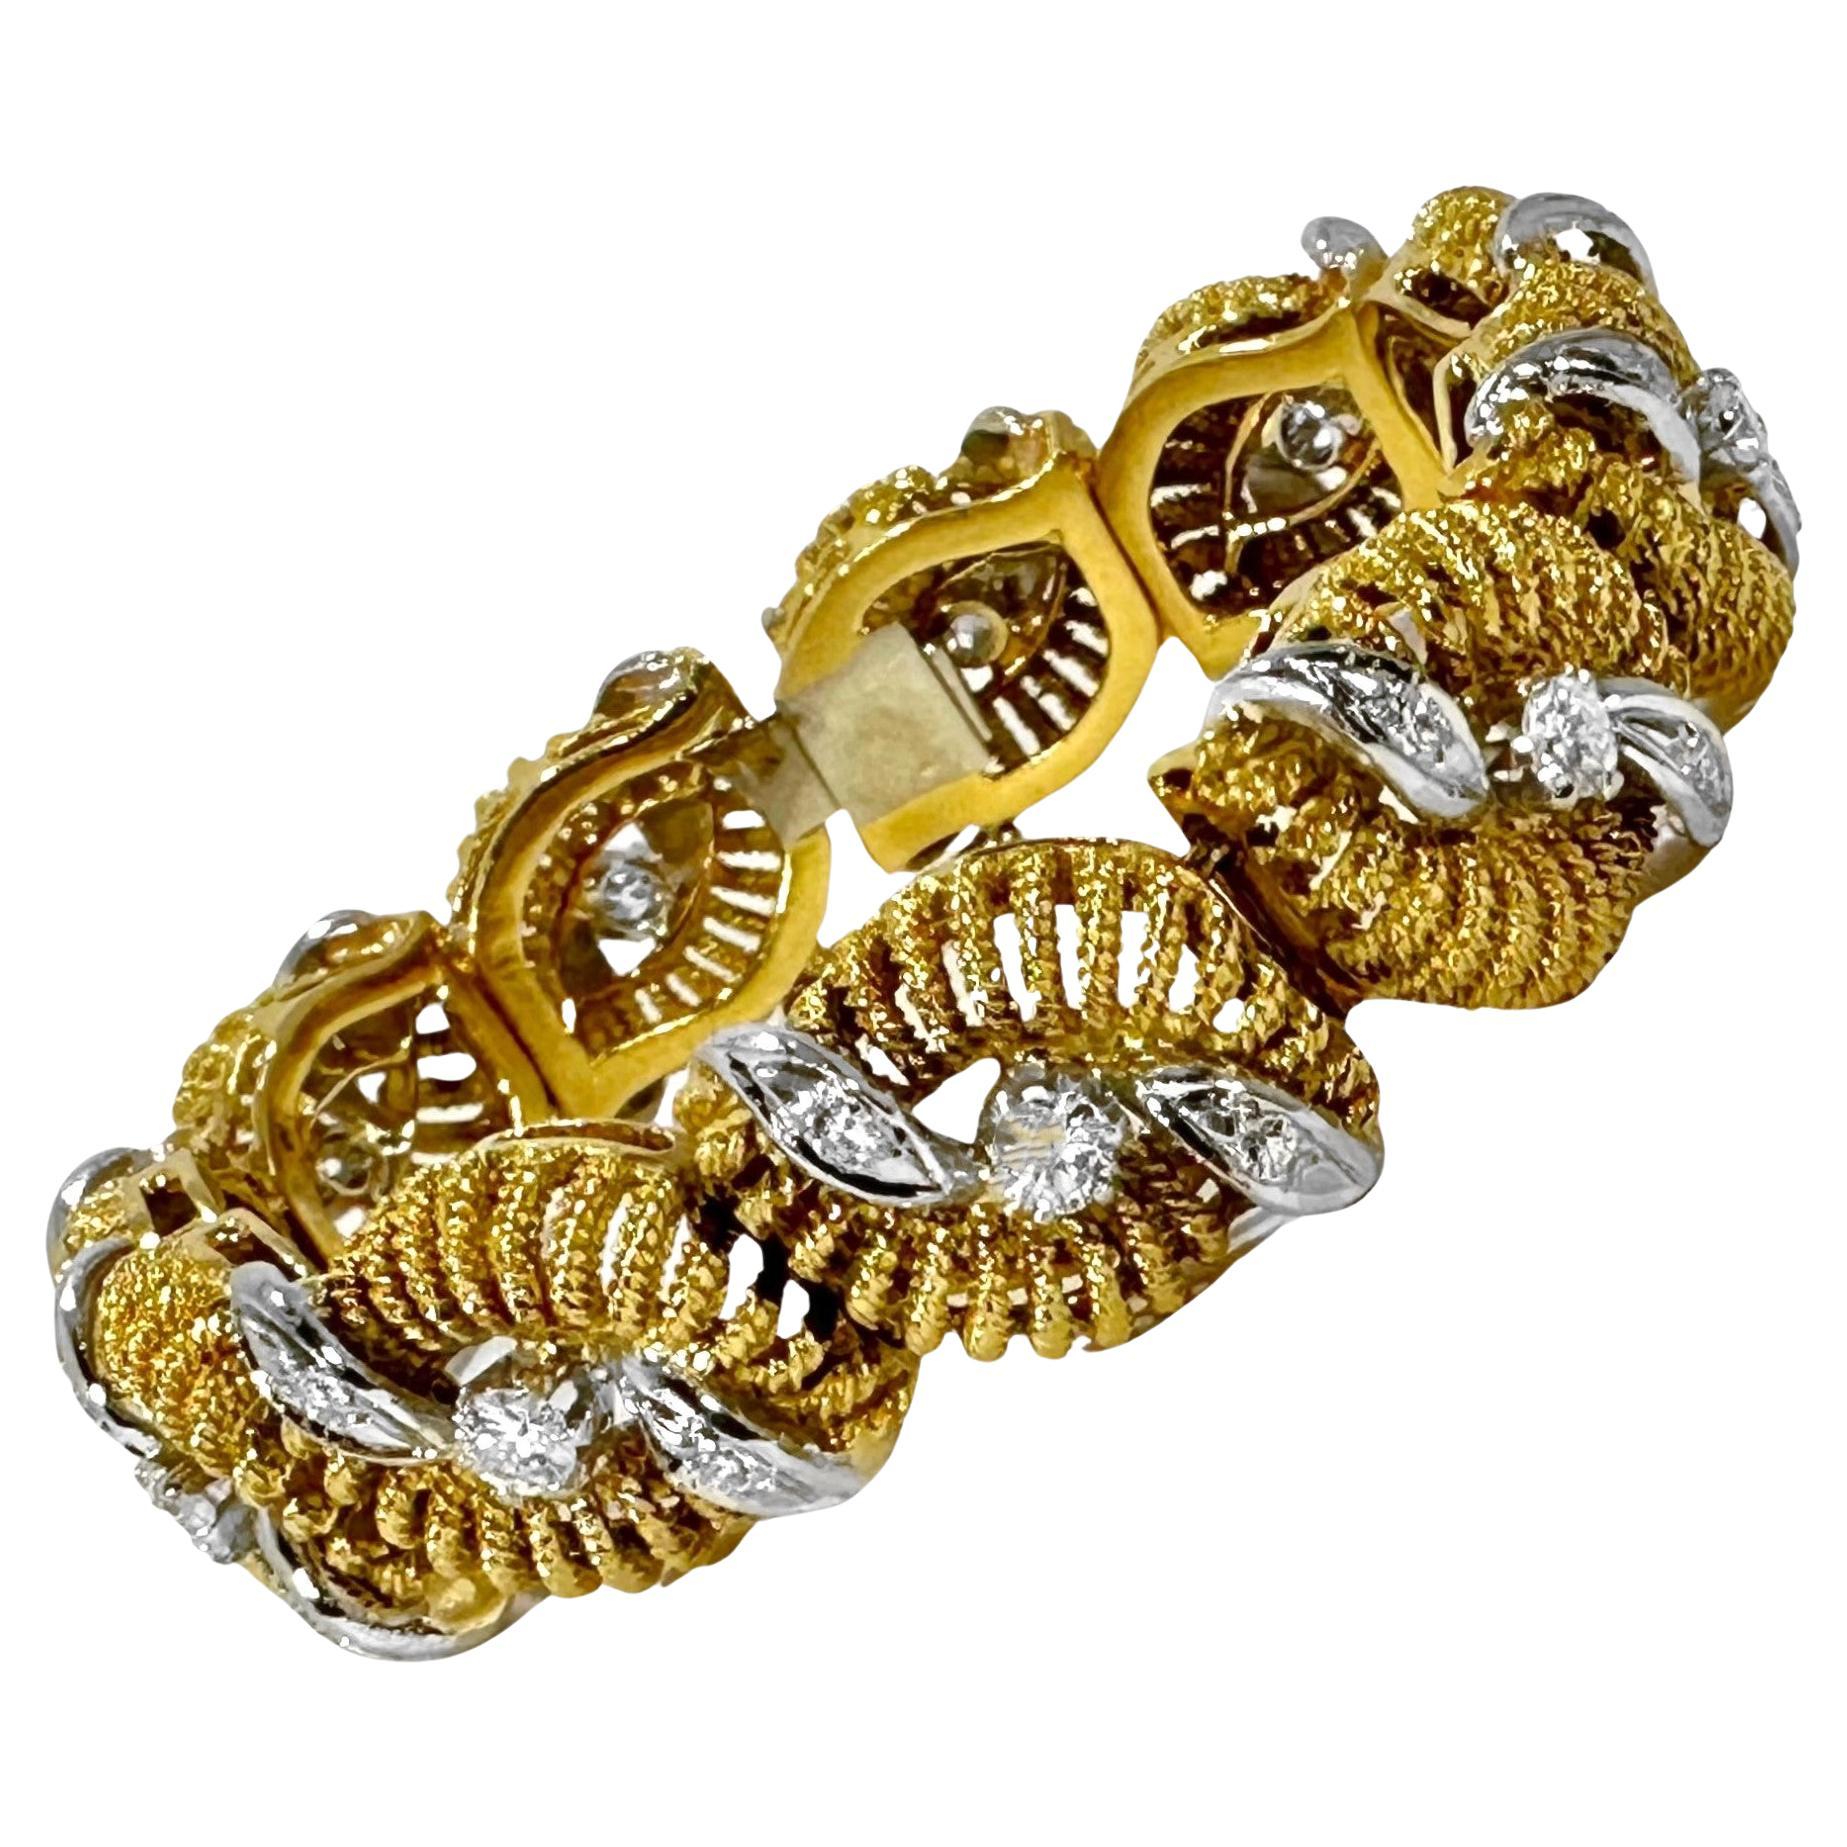 Hand Crafted 18K Mid-20th Century Gold and Diamond Cocktail Bracelet